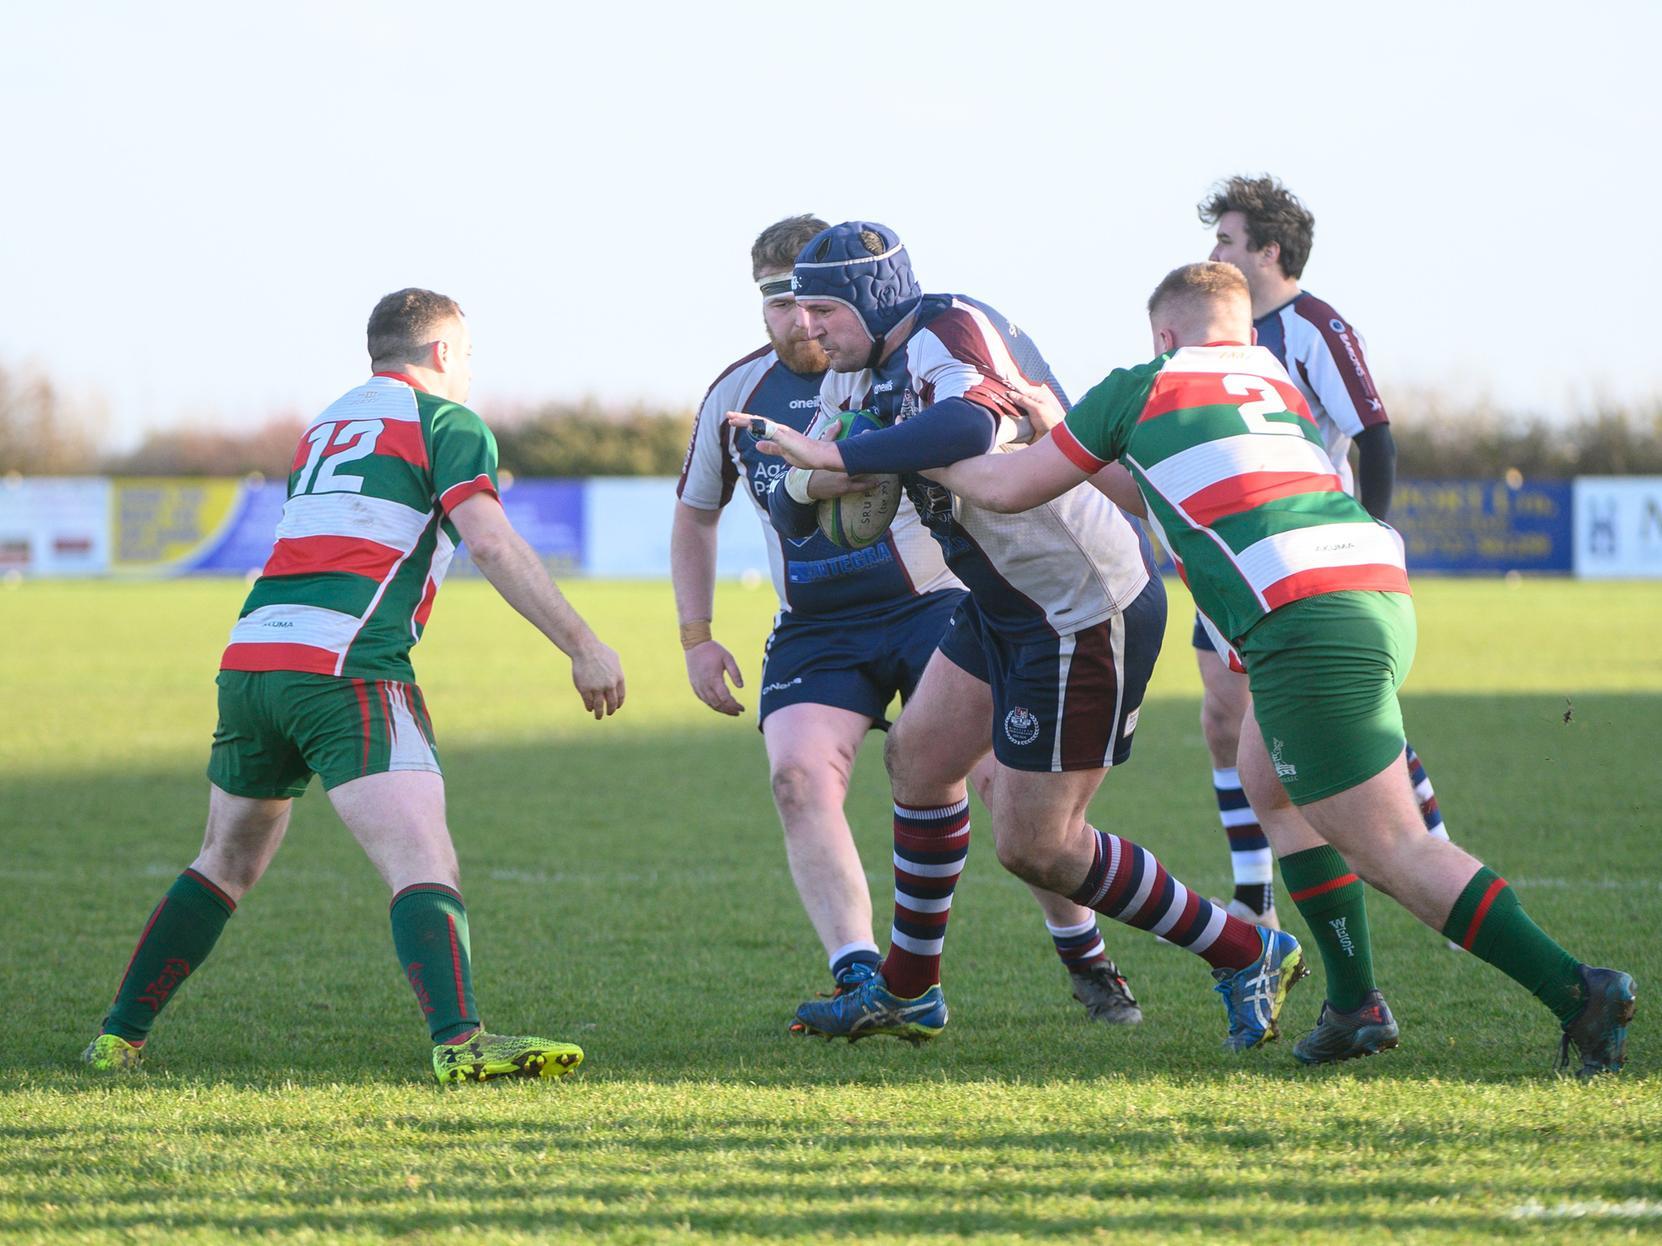 Scarborough RUFC v West Hartlepool

PHOTOS BY ANDY STANDING